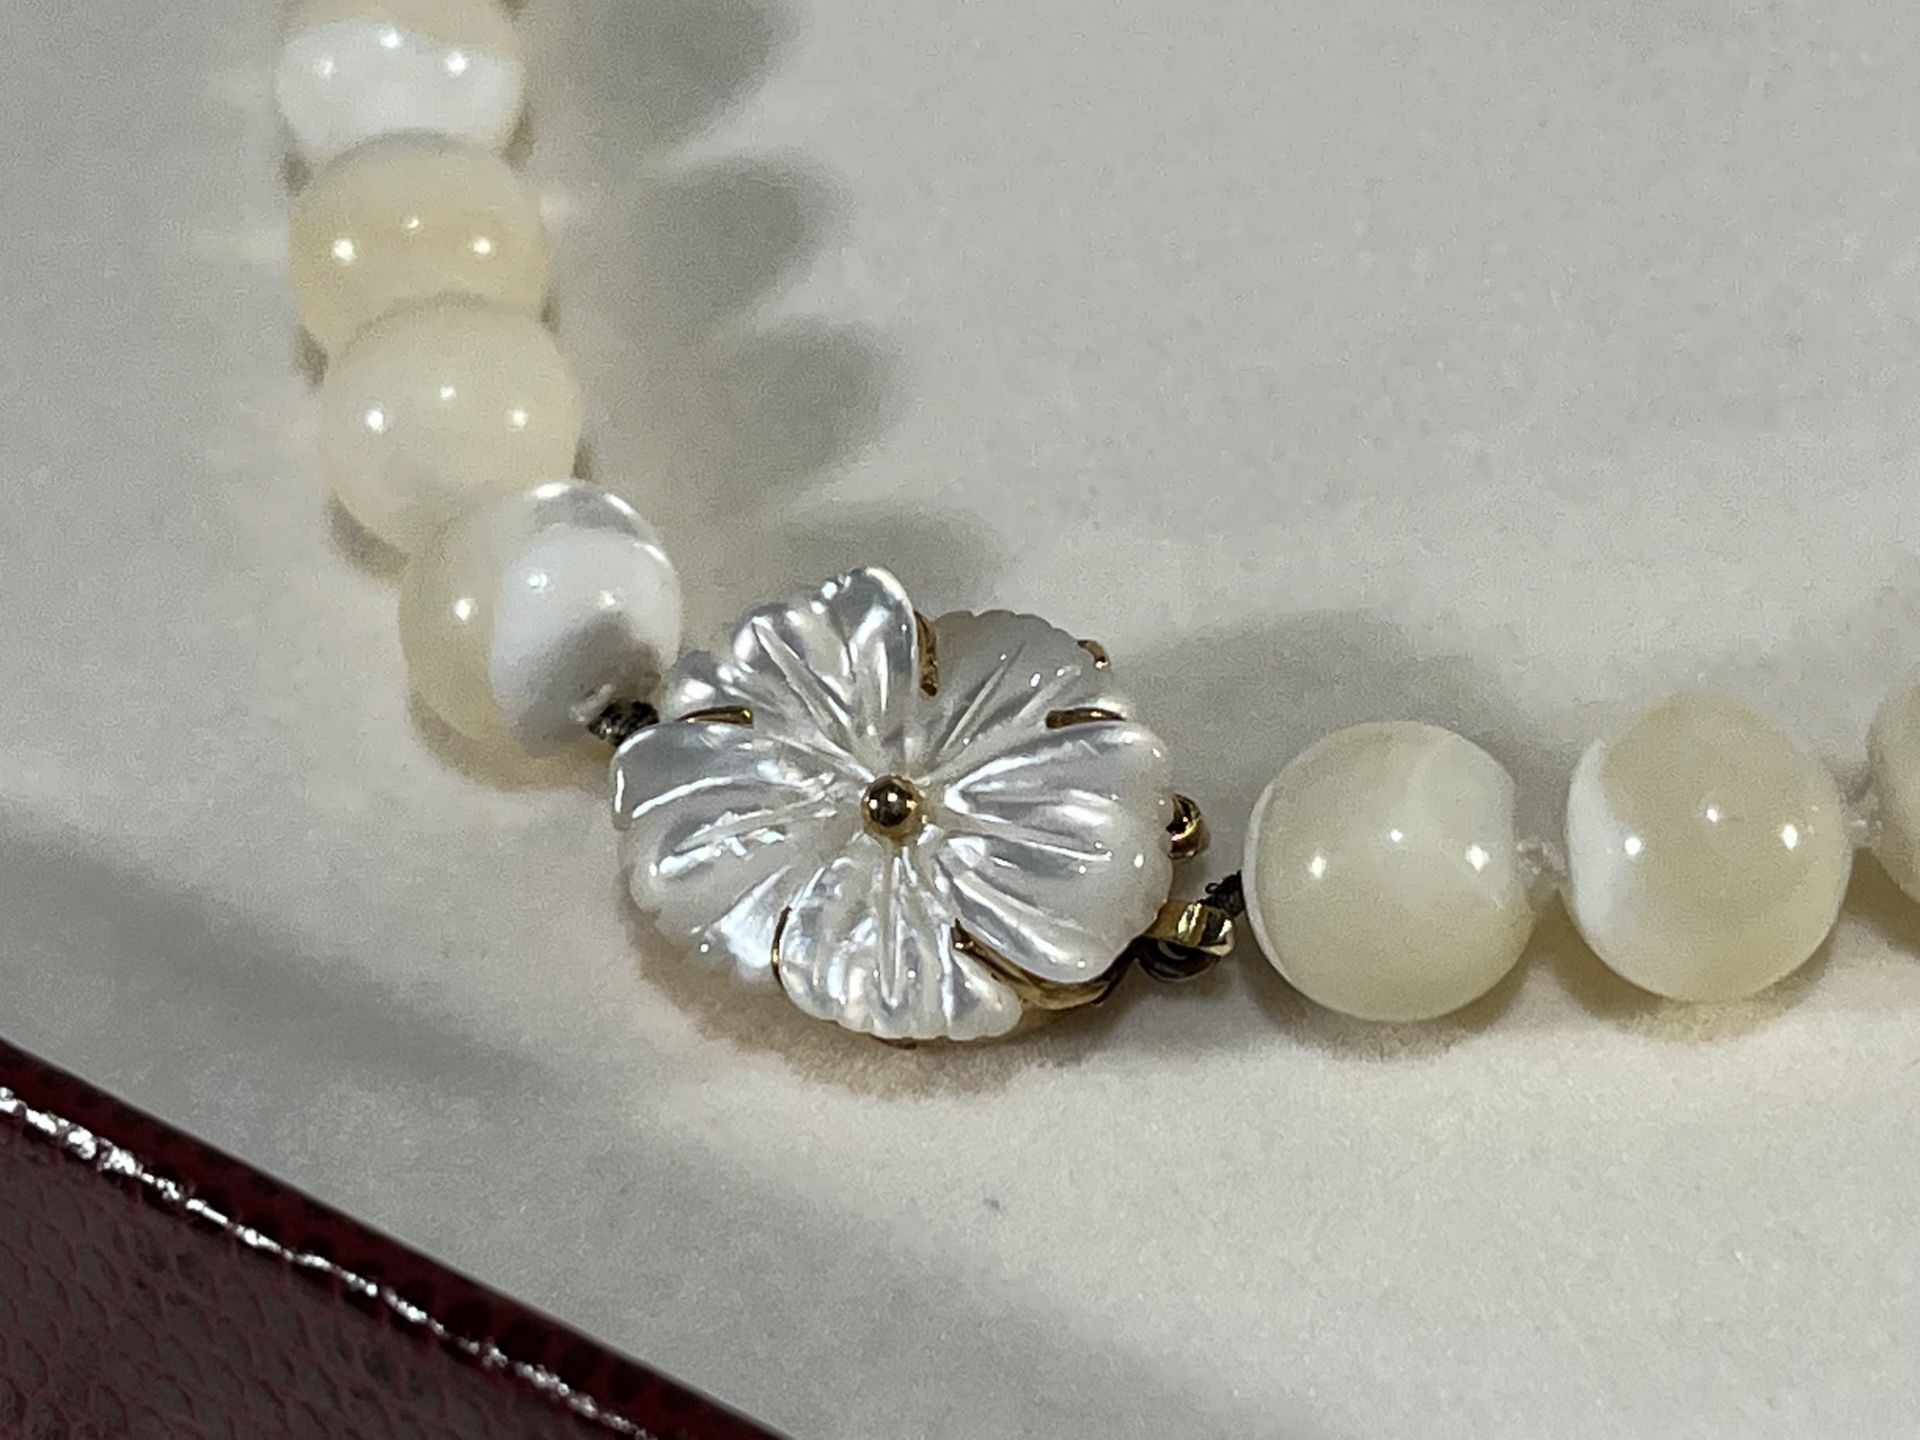 Elegant mother-of-pearl and mother-of-pearl necklace, mounted in 18k gold - Image 2 of 5